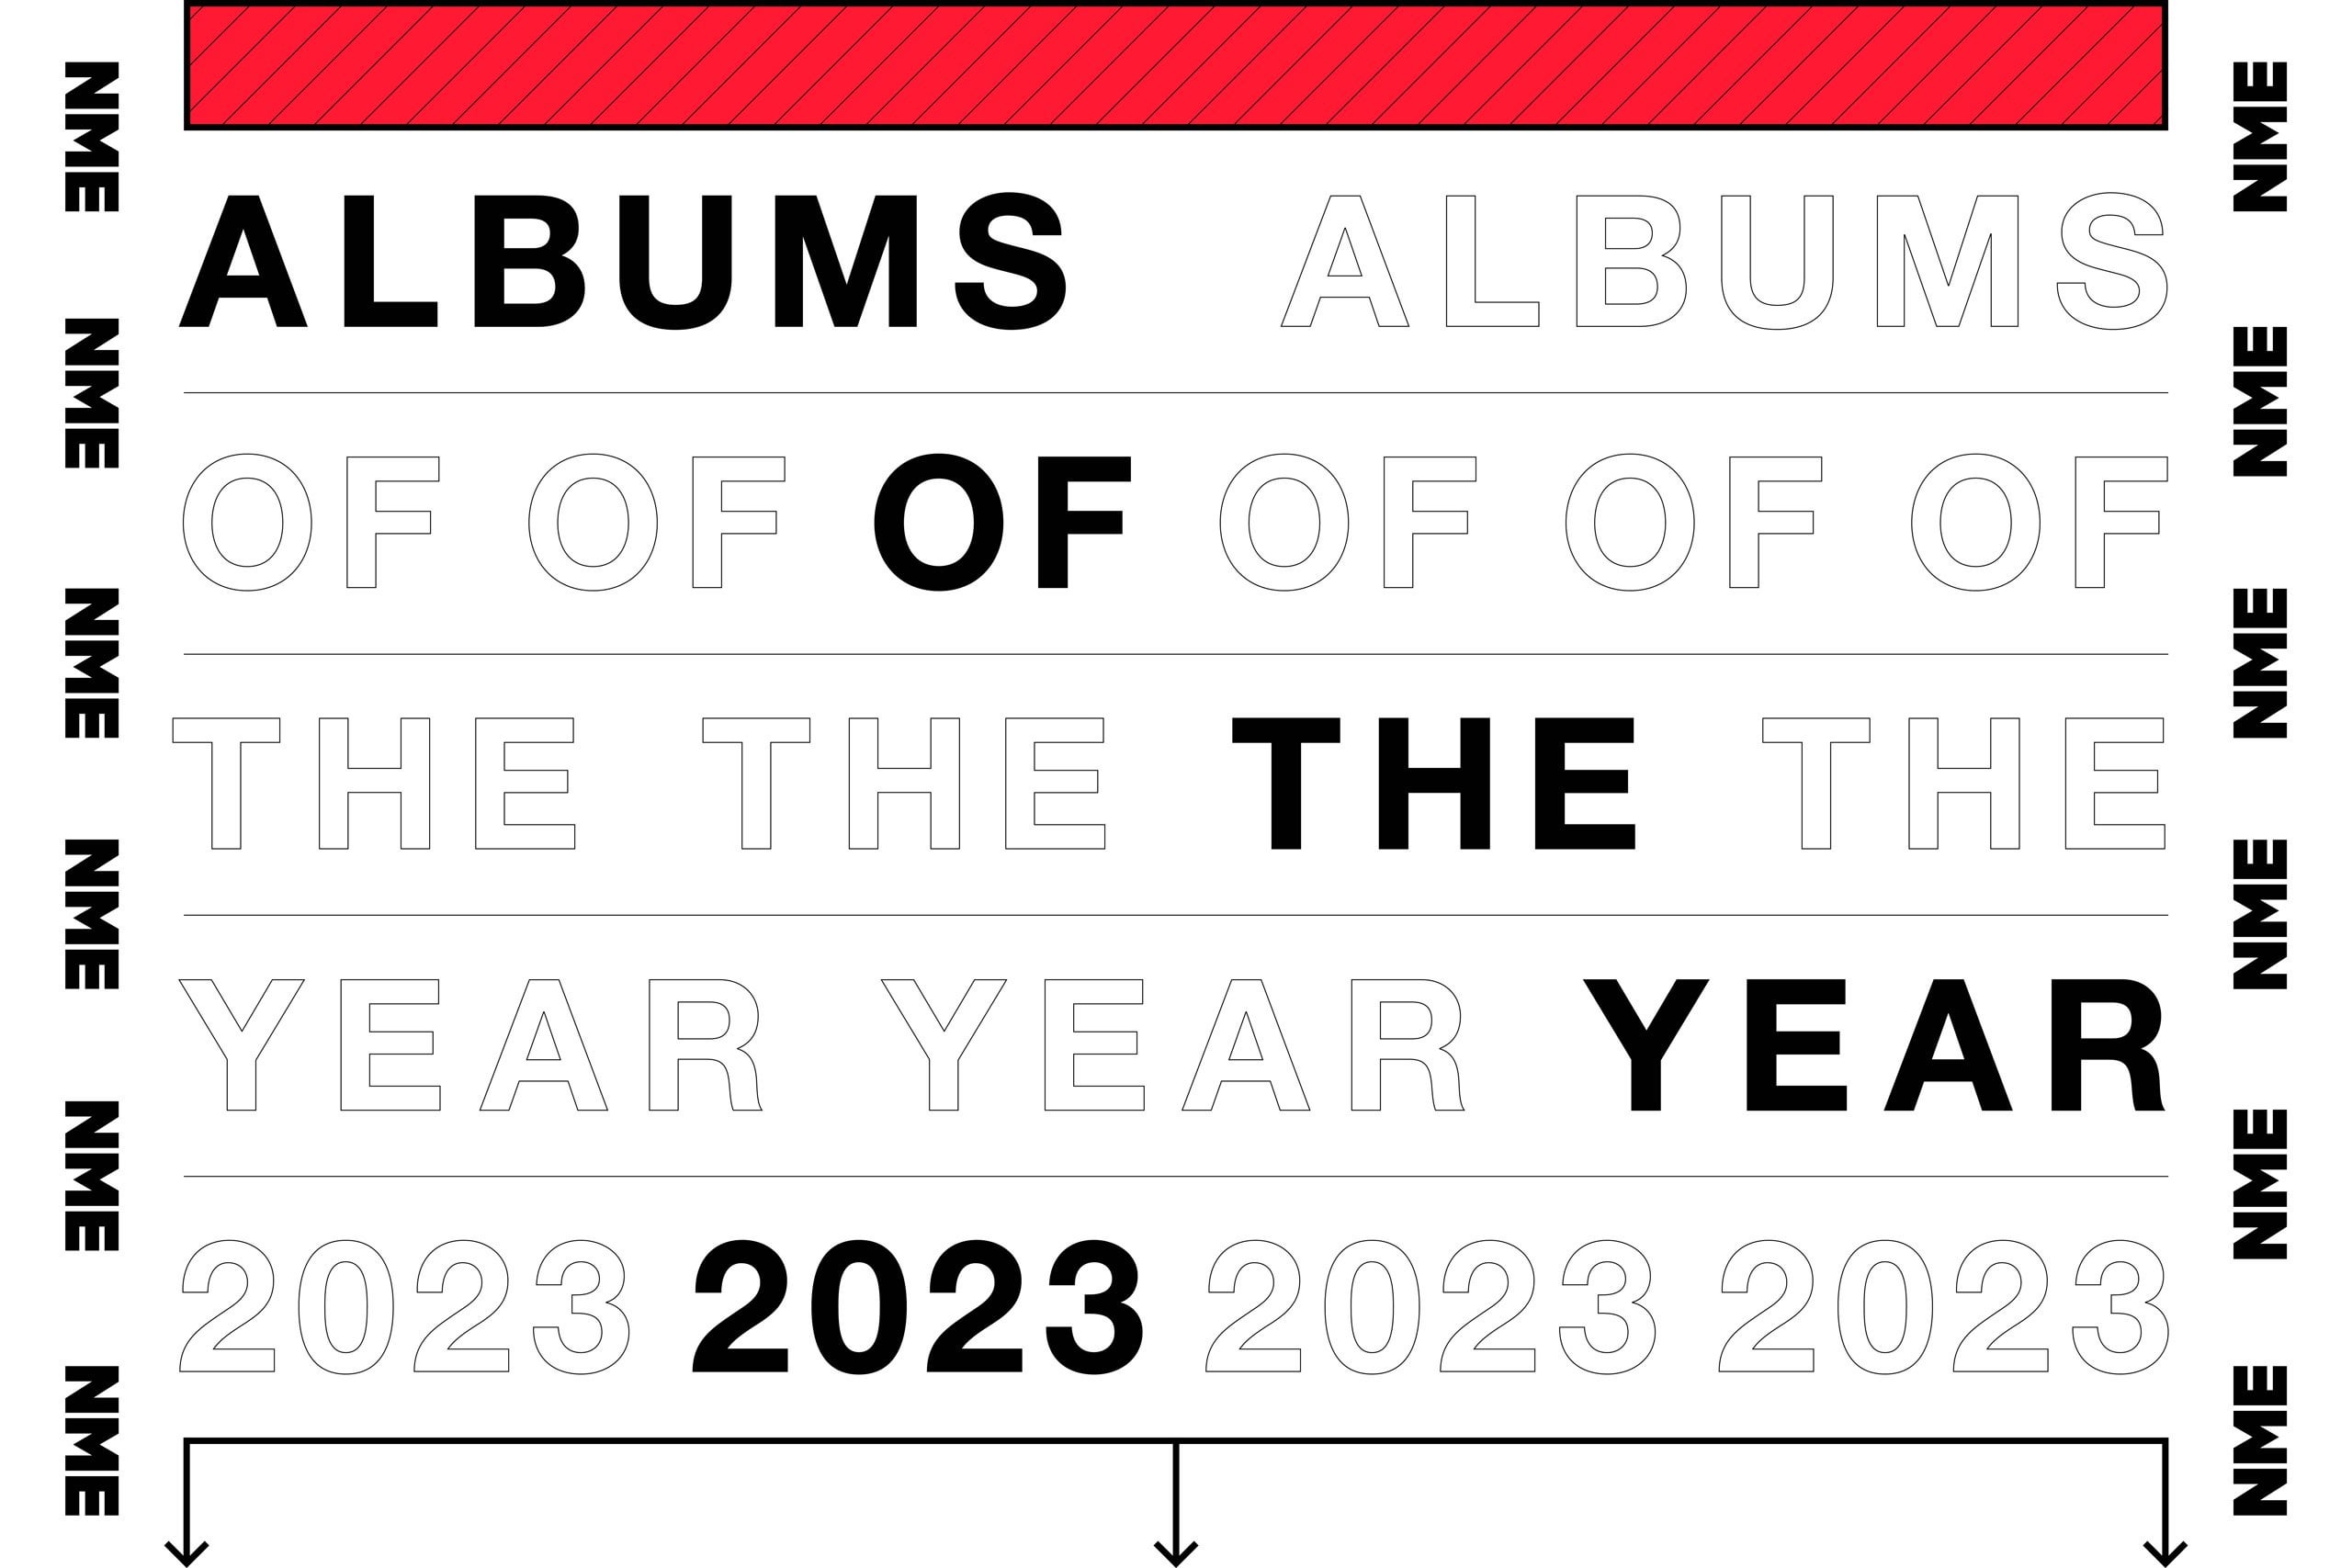 [NME] The Best Albums of 2023 (Agust D's "D-DAY" is ranked at #38)